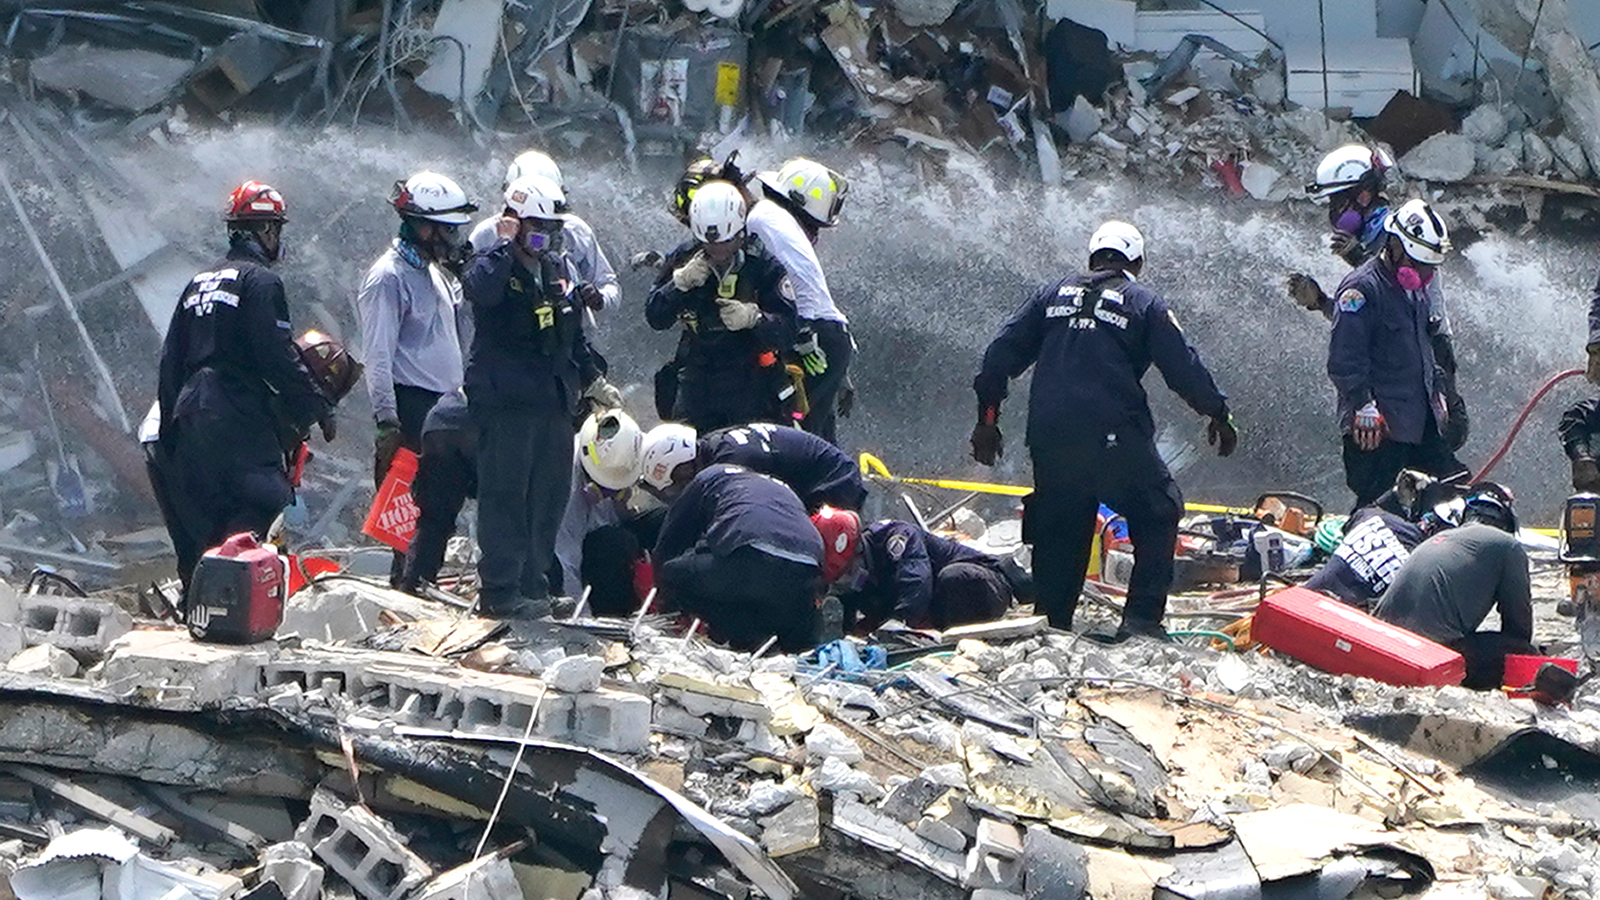 Rescue workers search the rubble of the Champlain Towers South condominium, Saturday, June 26, in the Surfside area of Miami.